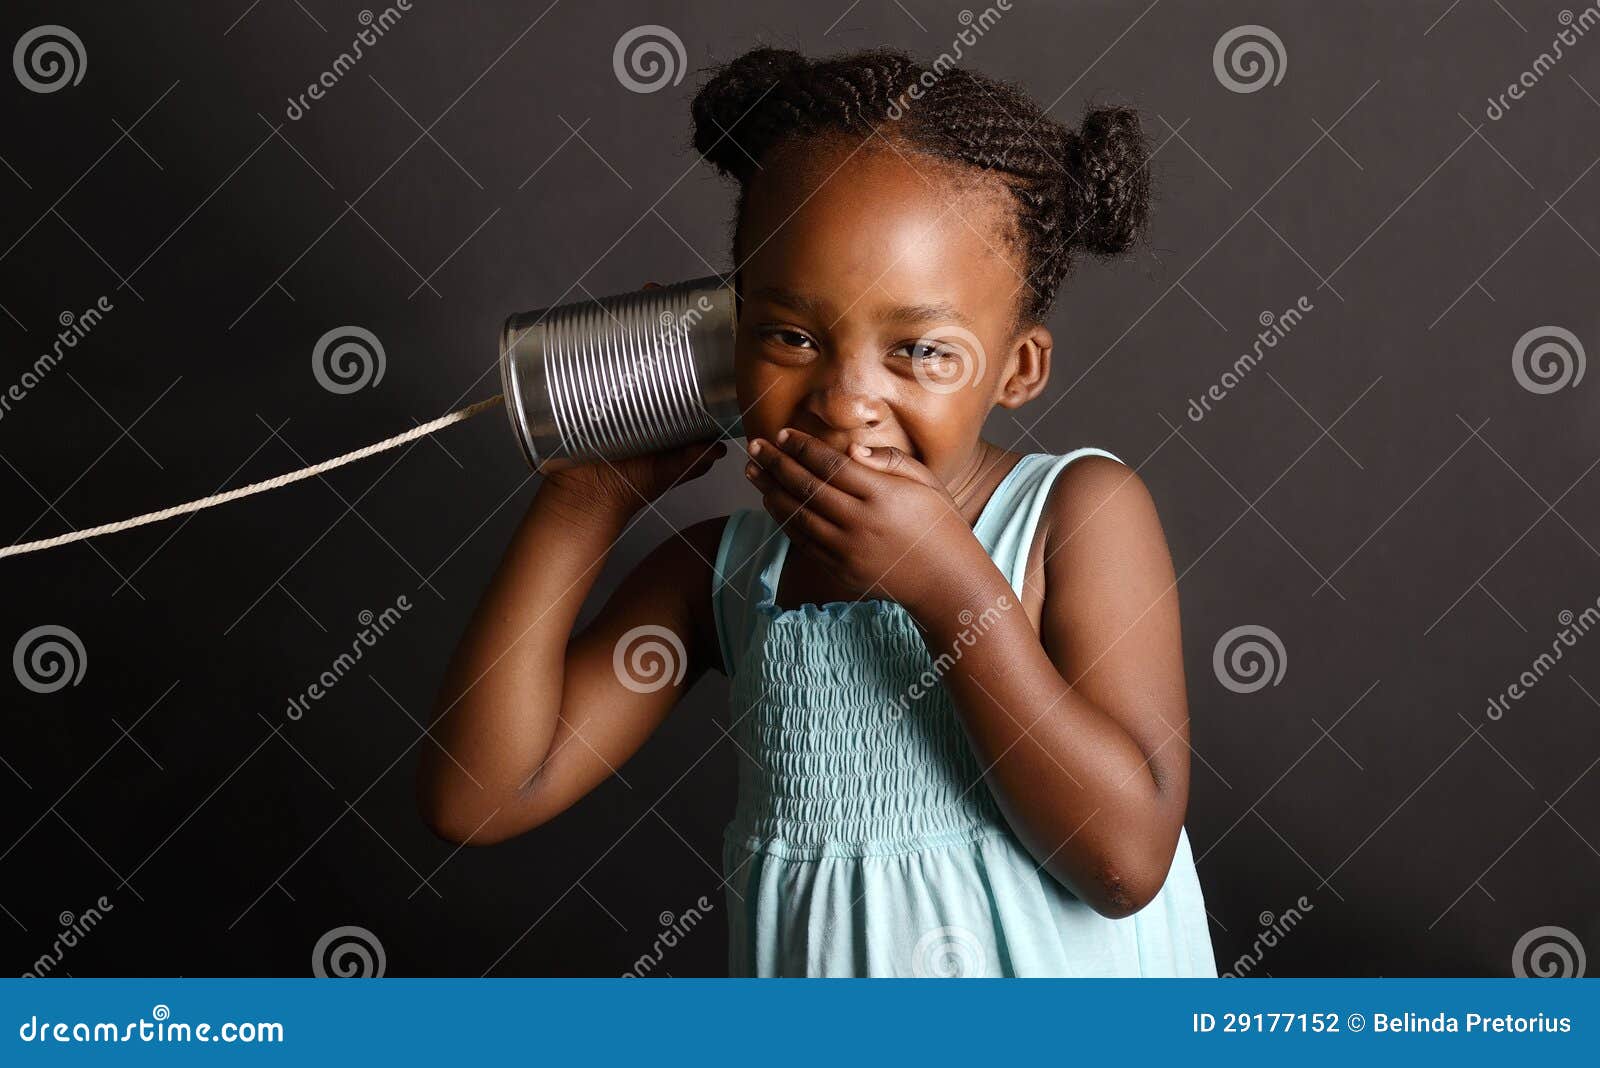 african girl with a tin and string on her ear